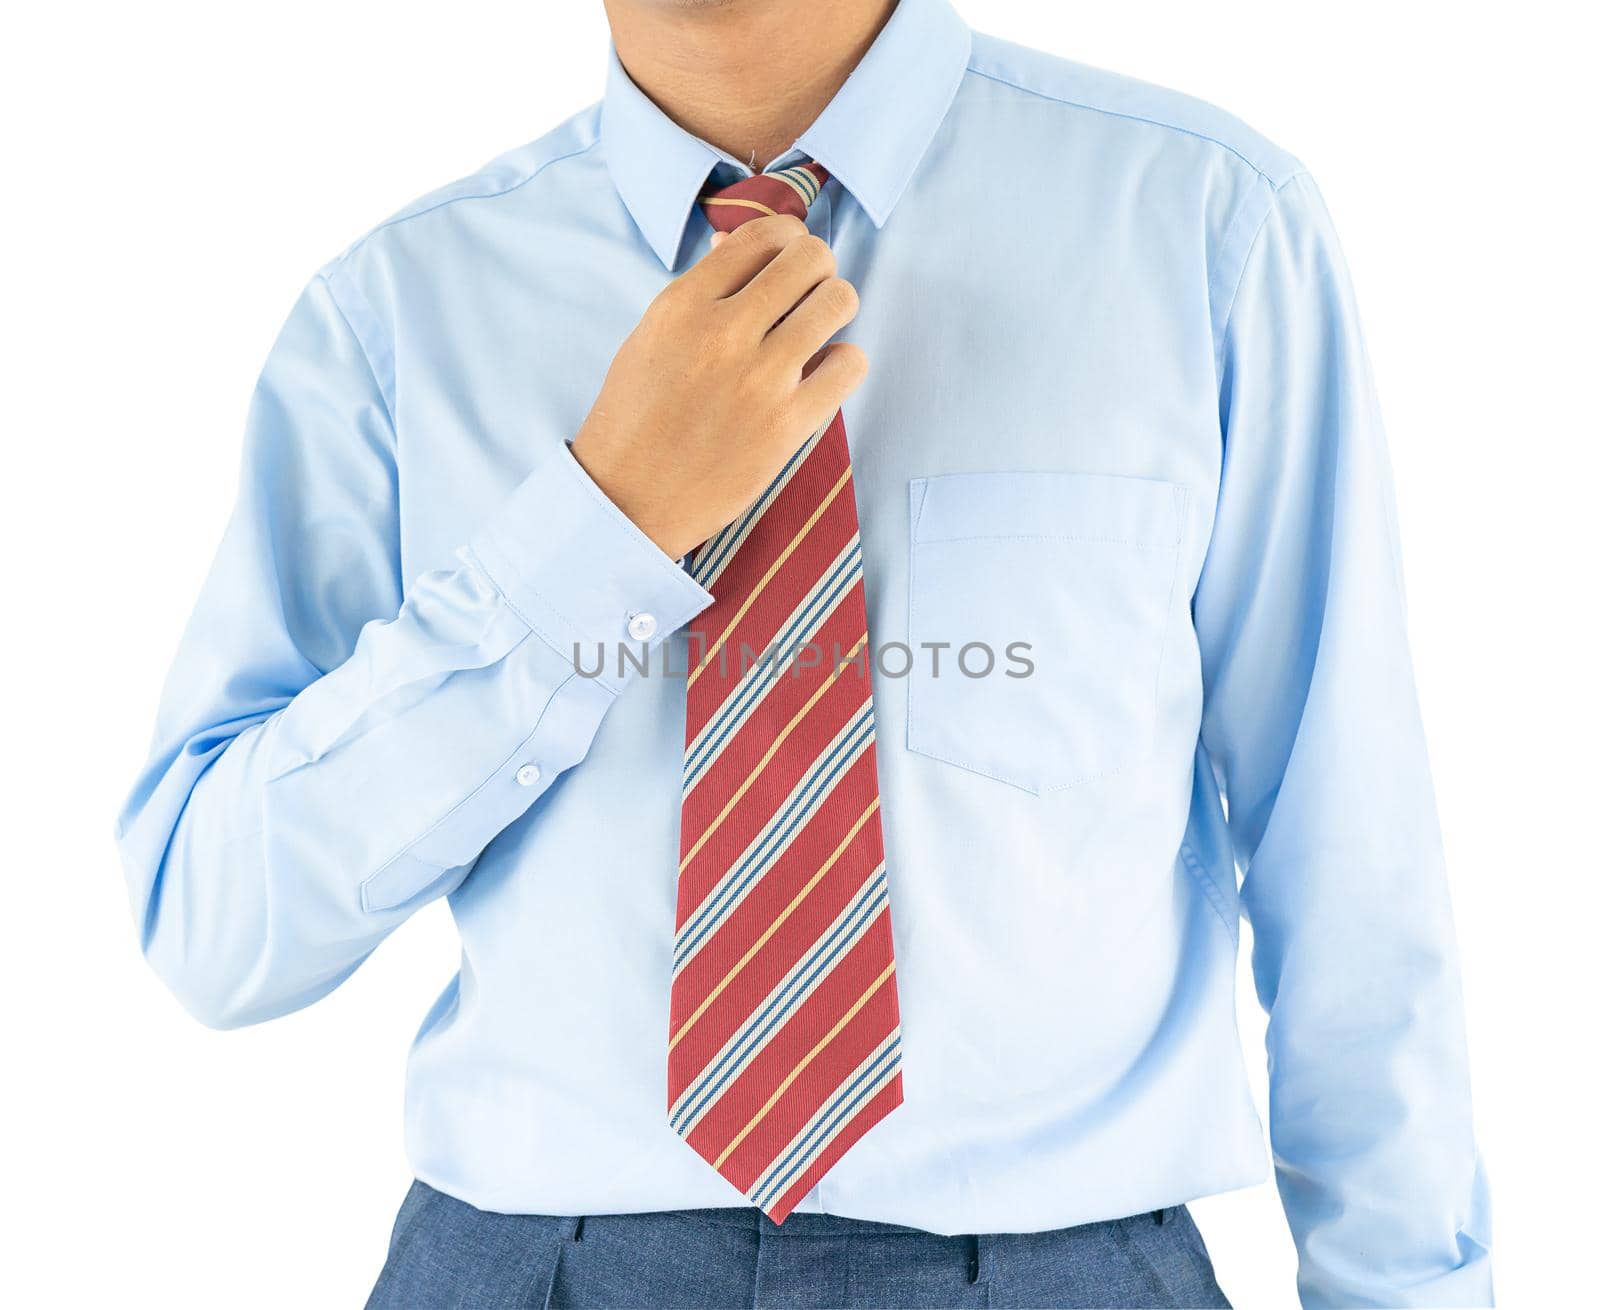 Close up, Male wearing blue shirt and red tie, he tighten the tie knot with clipping path